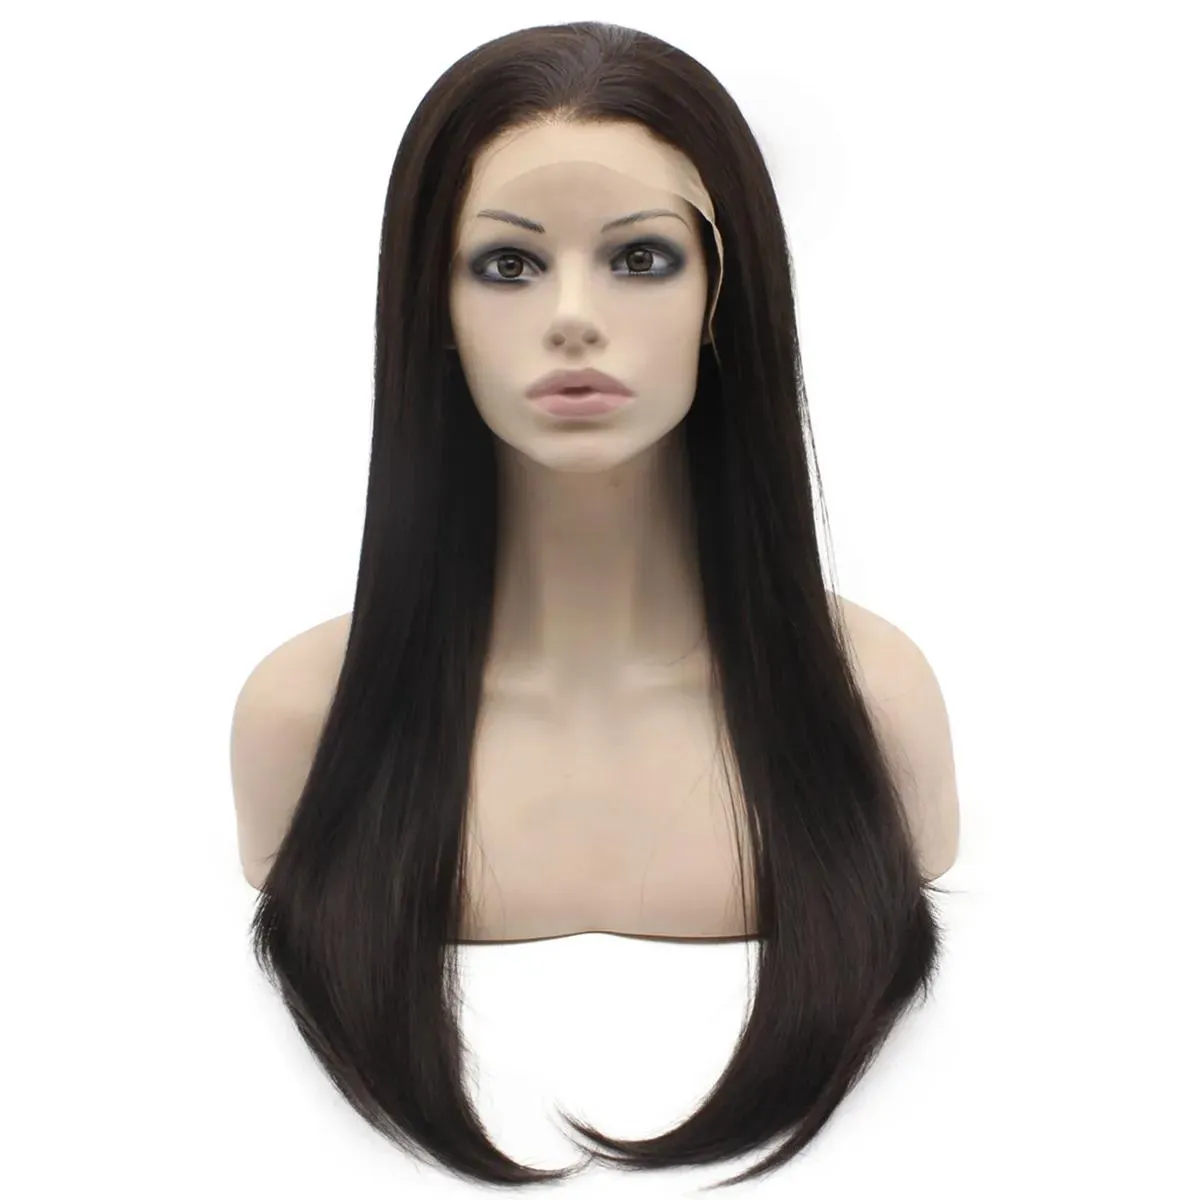 Wigs 24" #2/6 Mix Brown Silky Straight High Quality Heavy Density Heat Safe Fiber Lace Front Synthetic Hair Wig With Skin Top